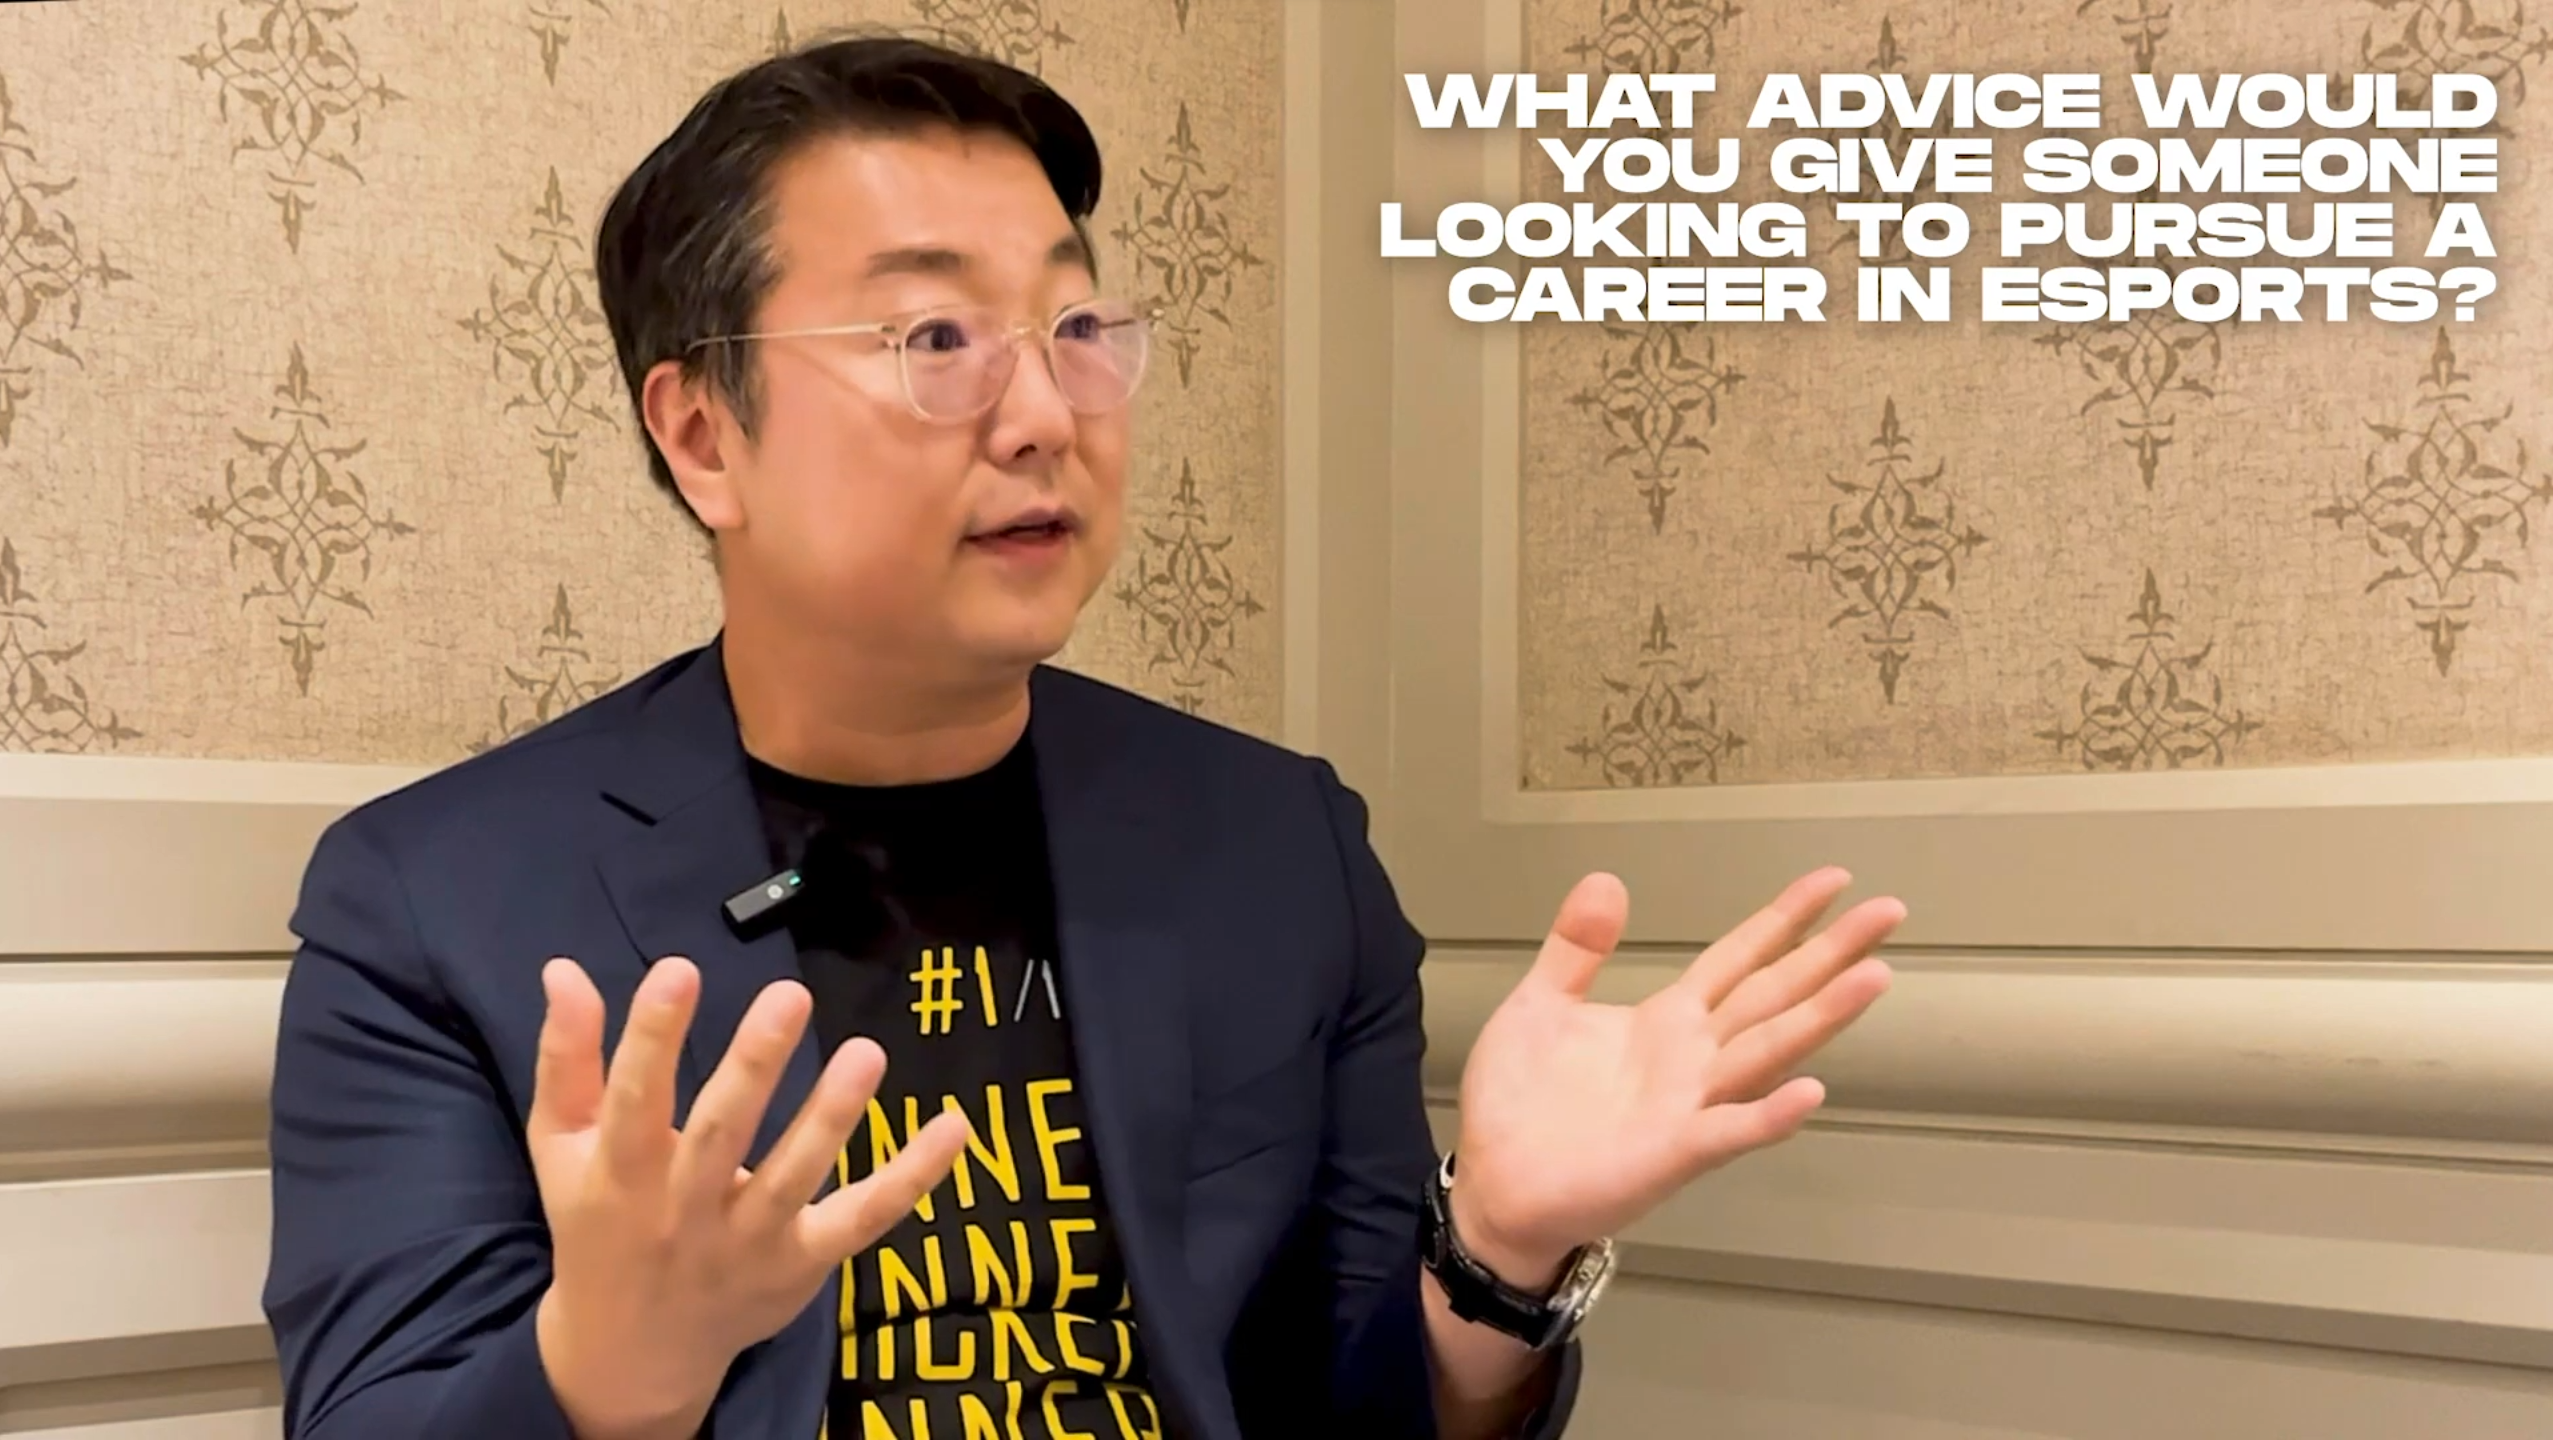 James Yang Tencent Giving Advice for a Career in Esports